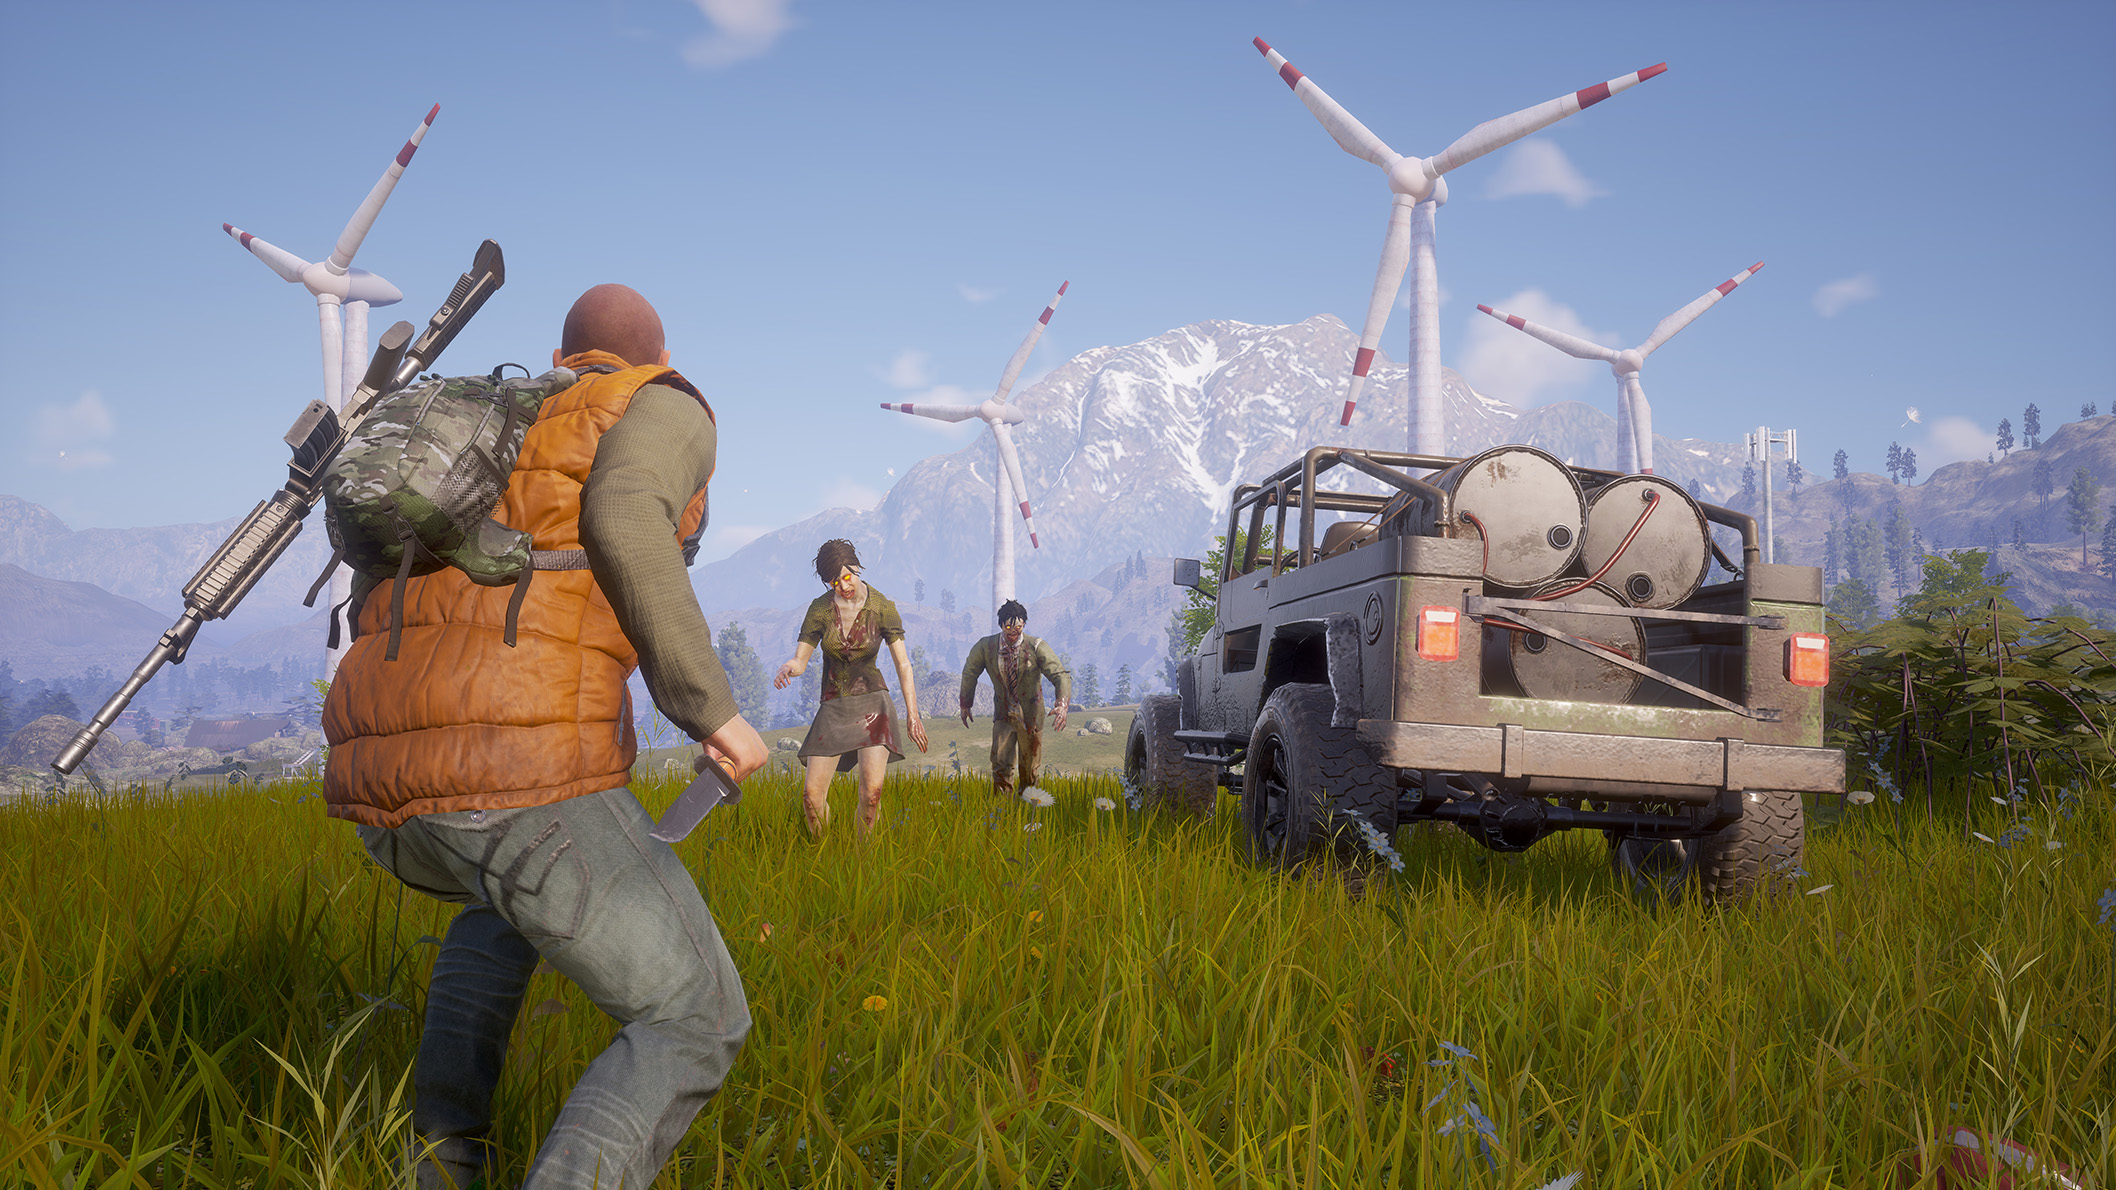 state of decay 2 buy pc